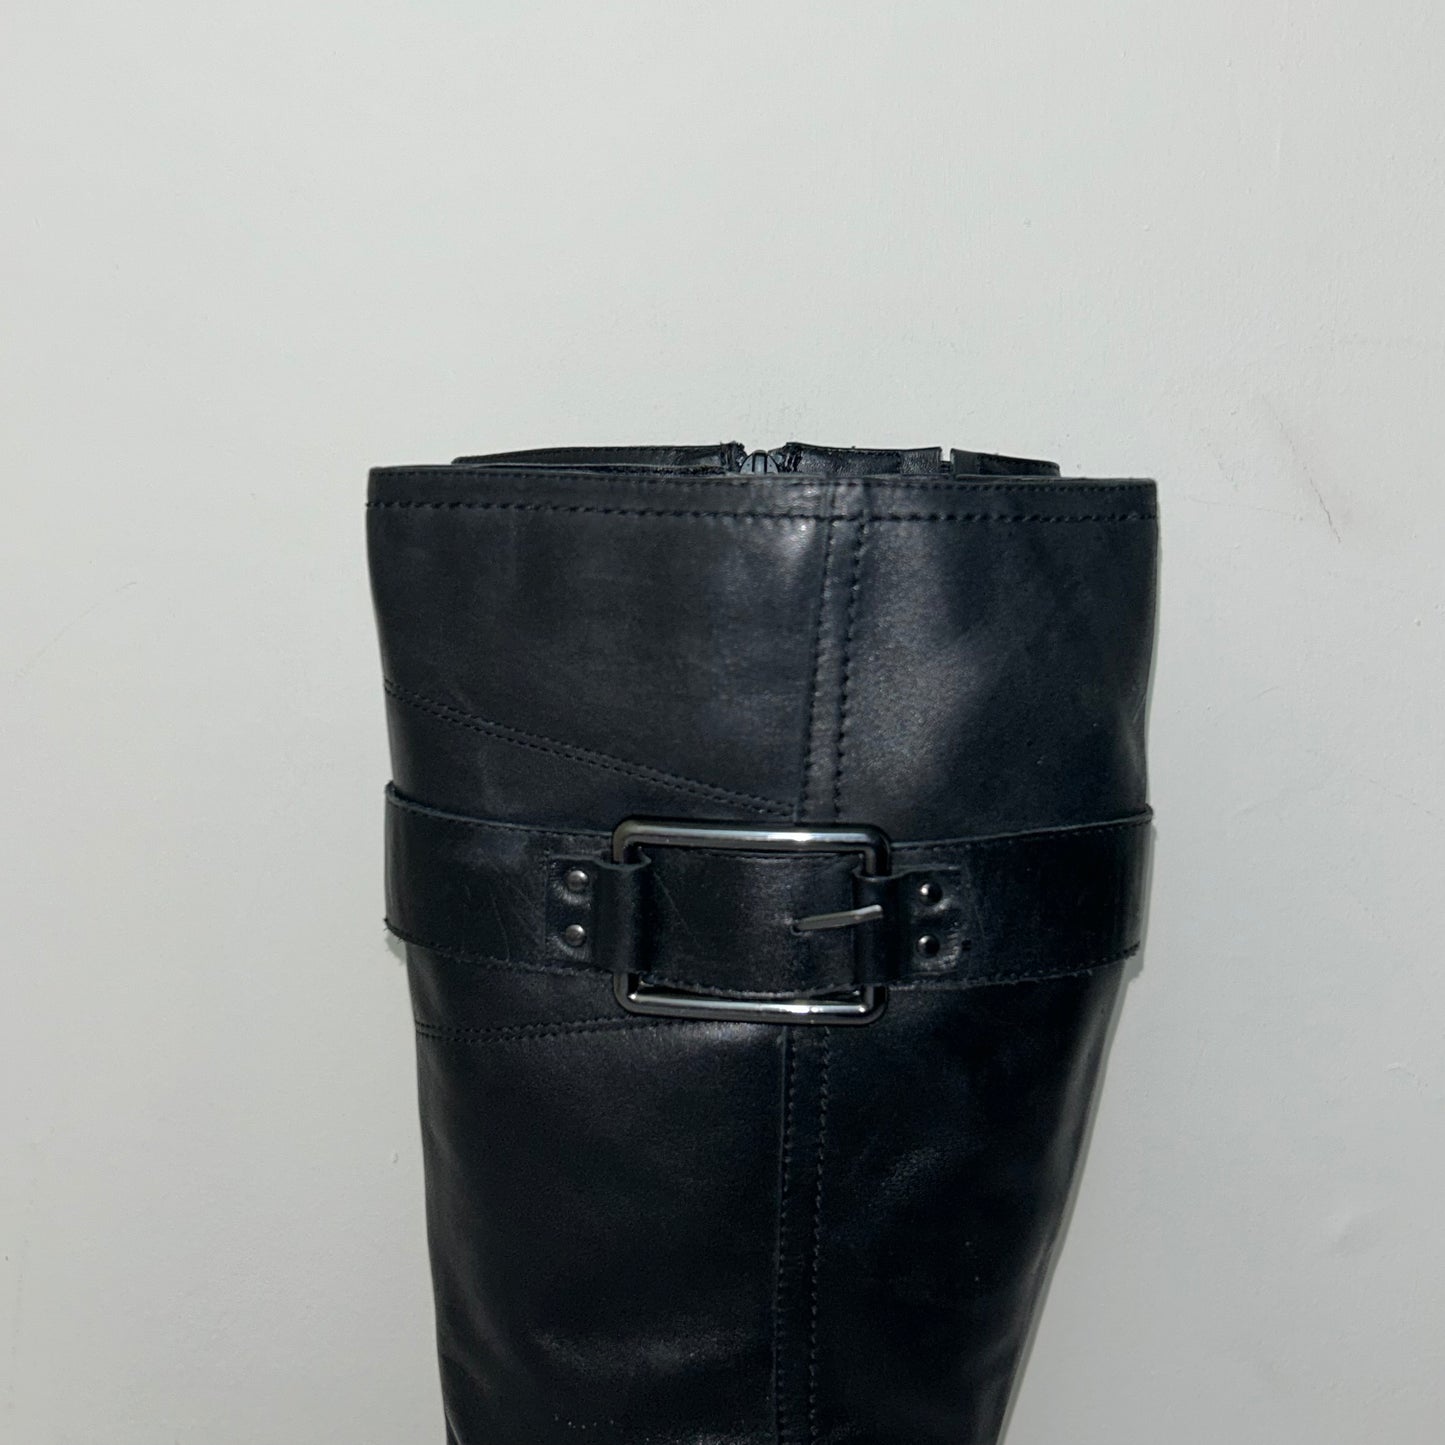 buckle of black knee high real leather boots shown on a white background